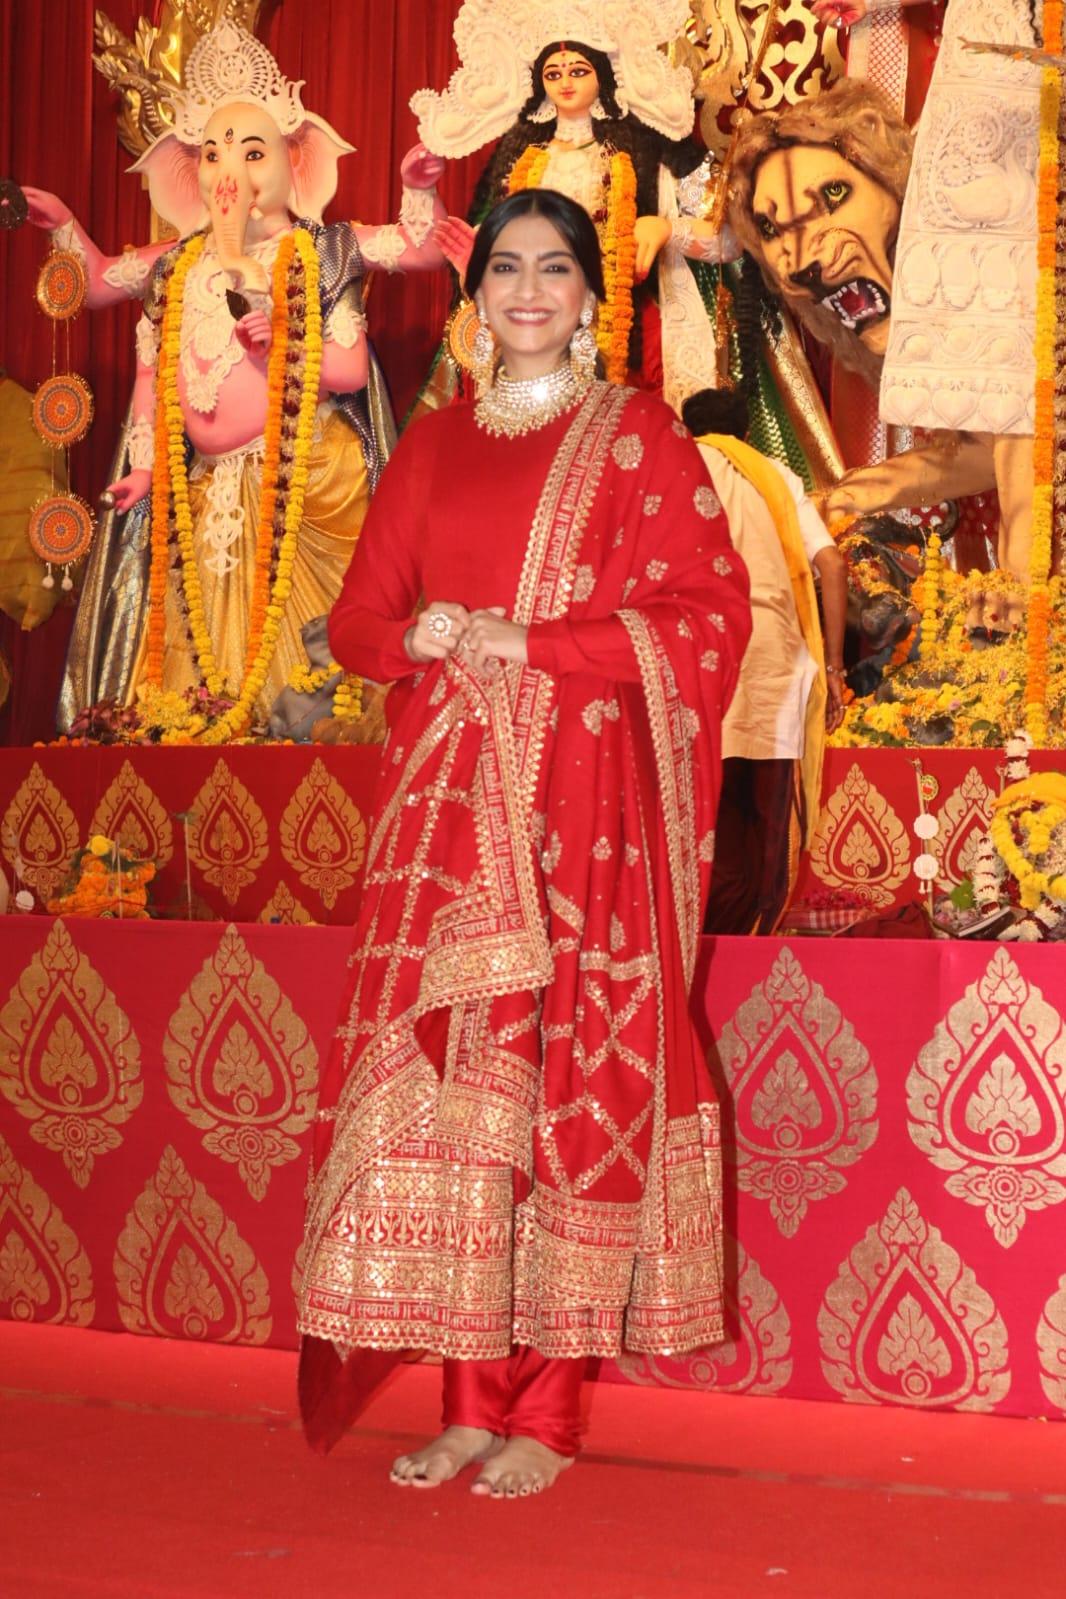 Sonam Kapoor looked stunning as she opted for a heavily embroidered red suit while visiting the Durga Puja pandal in Juhu